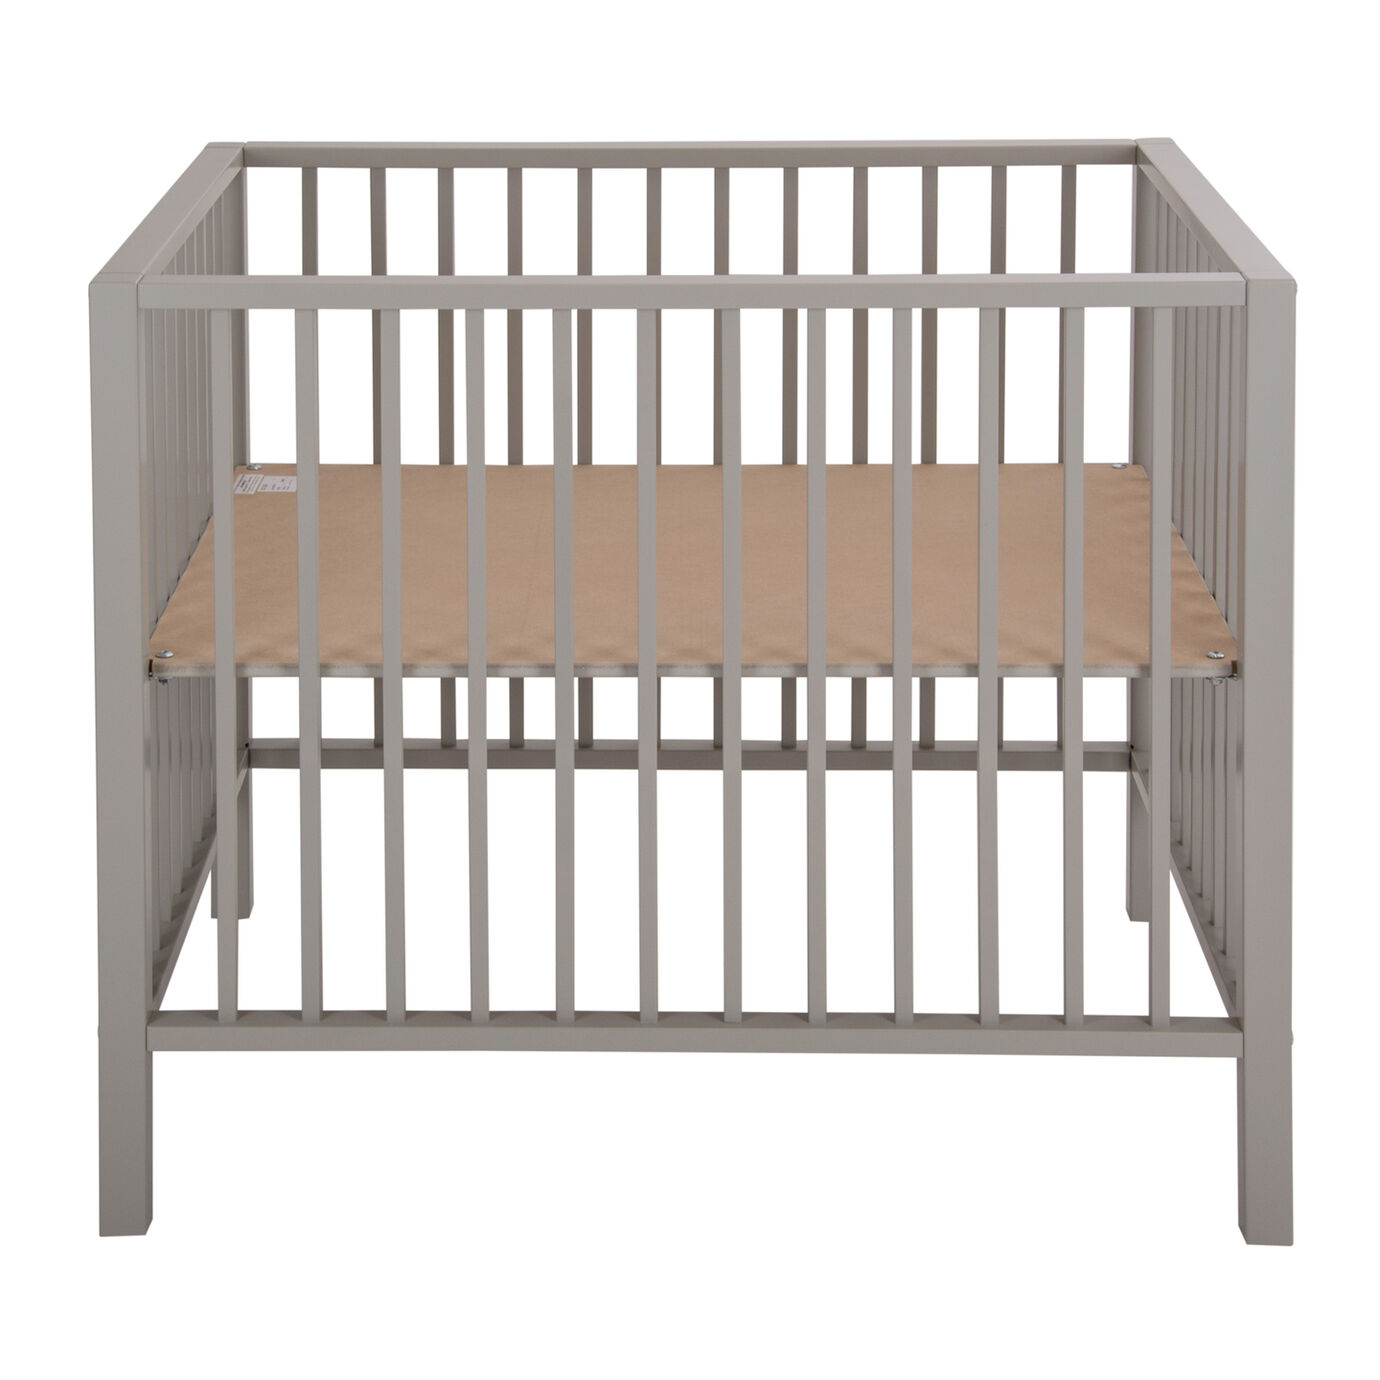 Order The Quax Playpen Nordic, Griffin Duo Bunk Bed